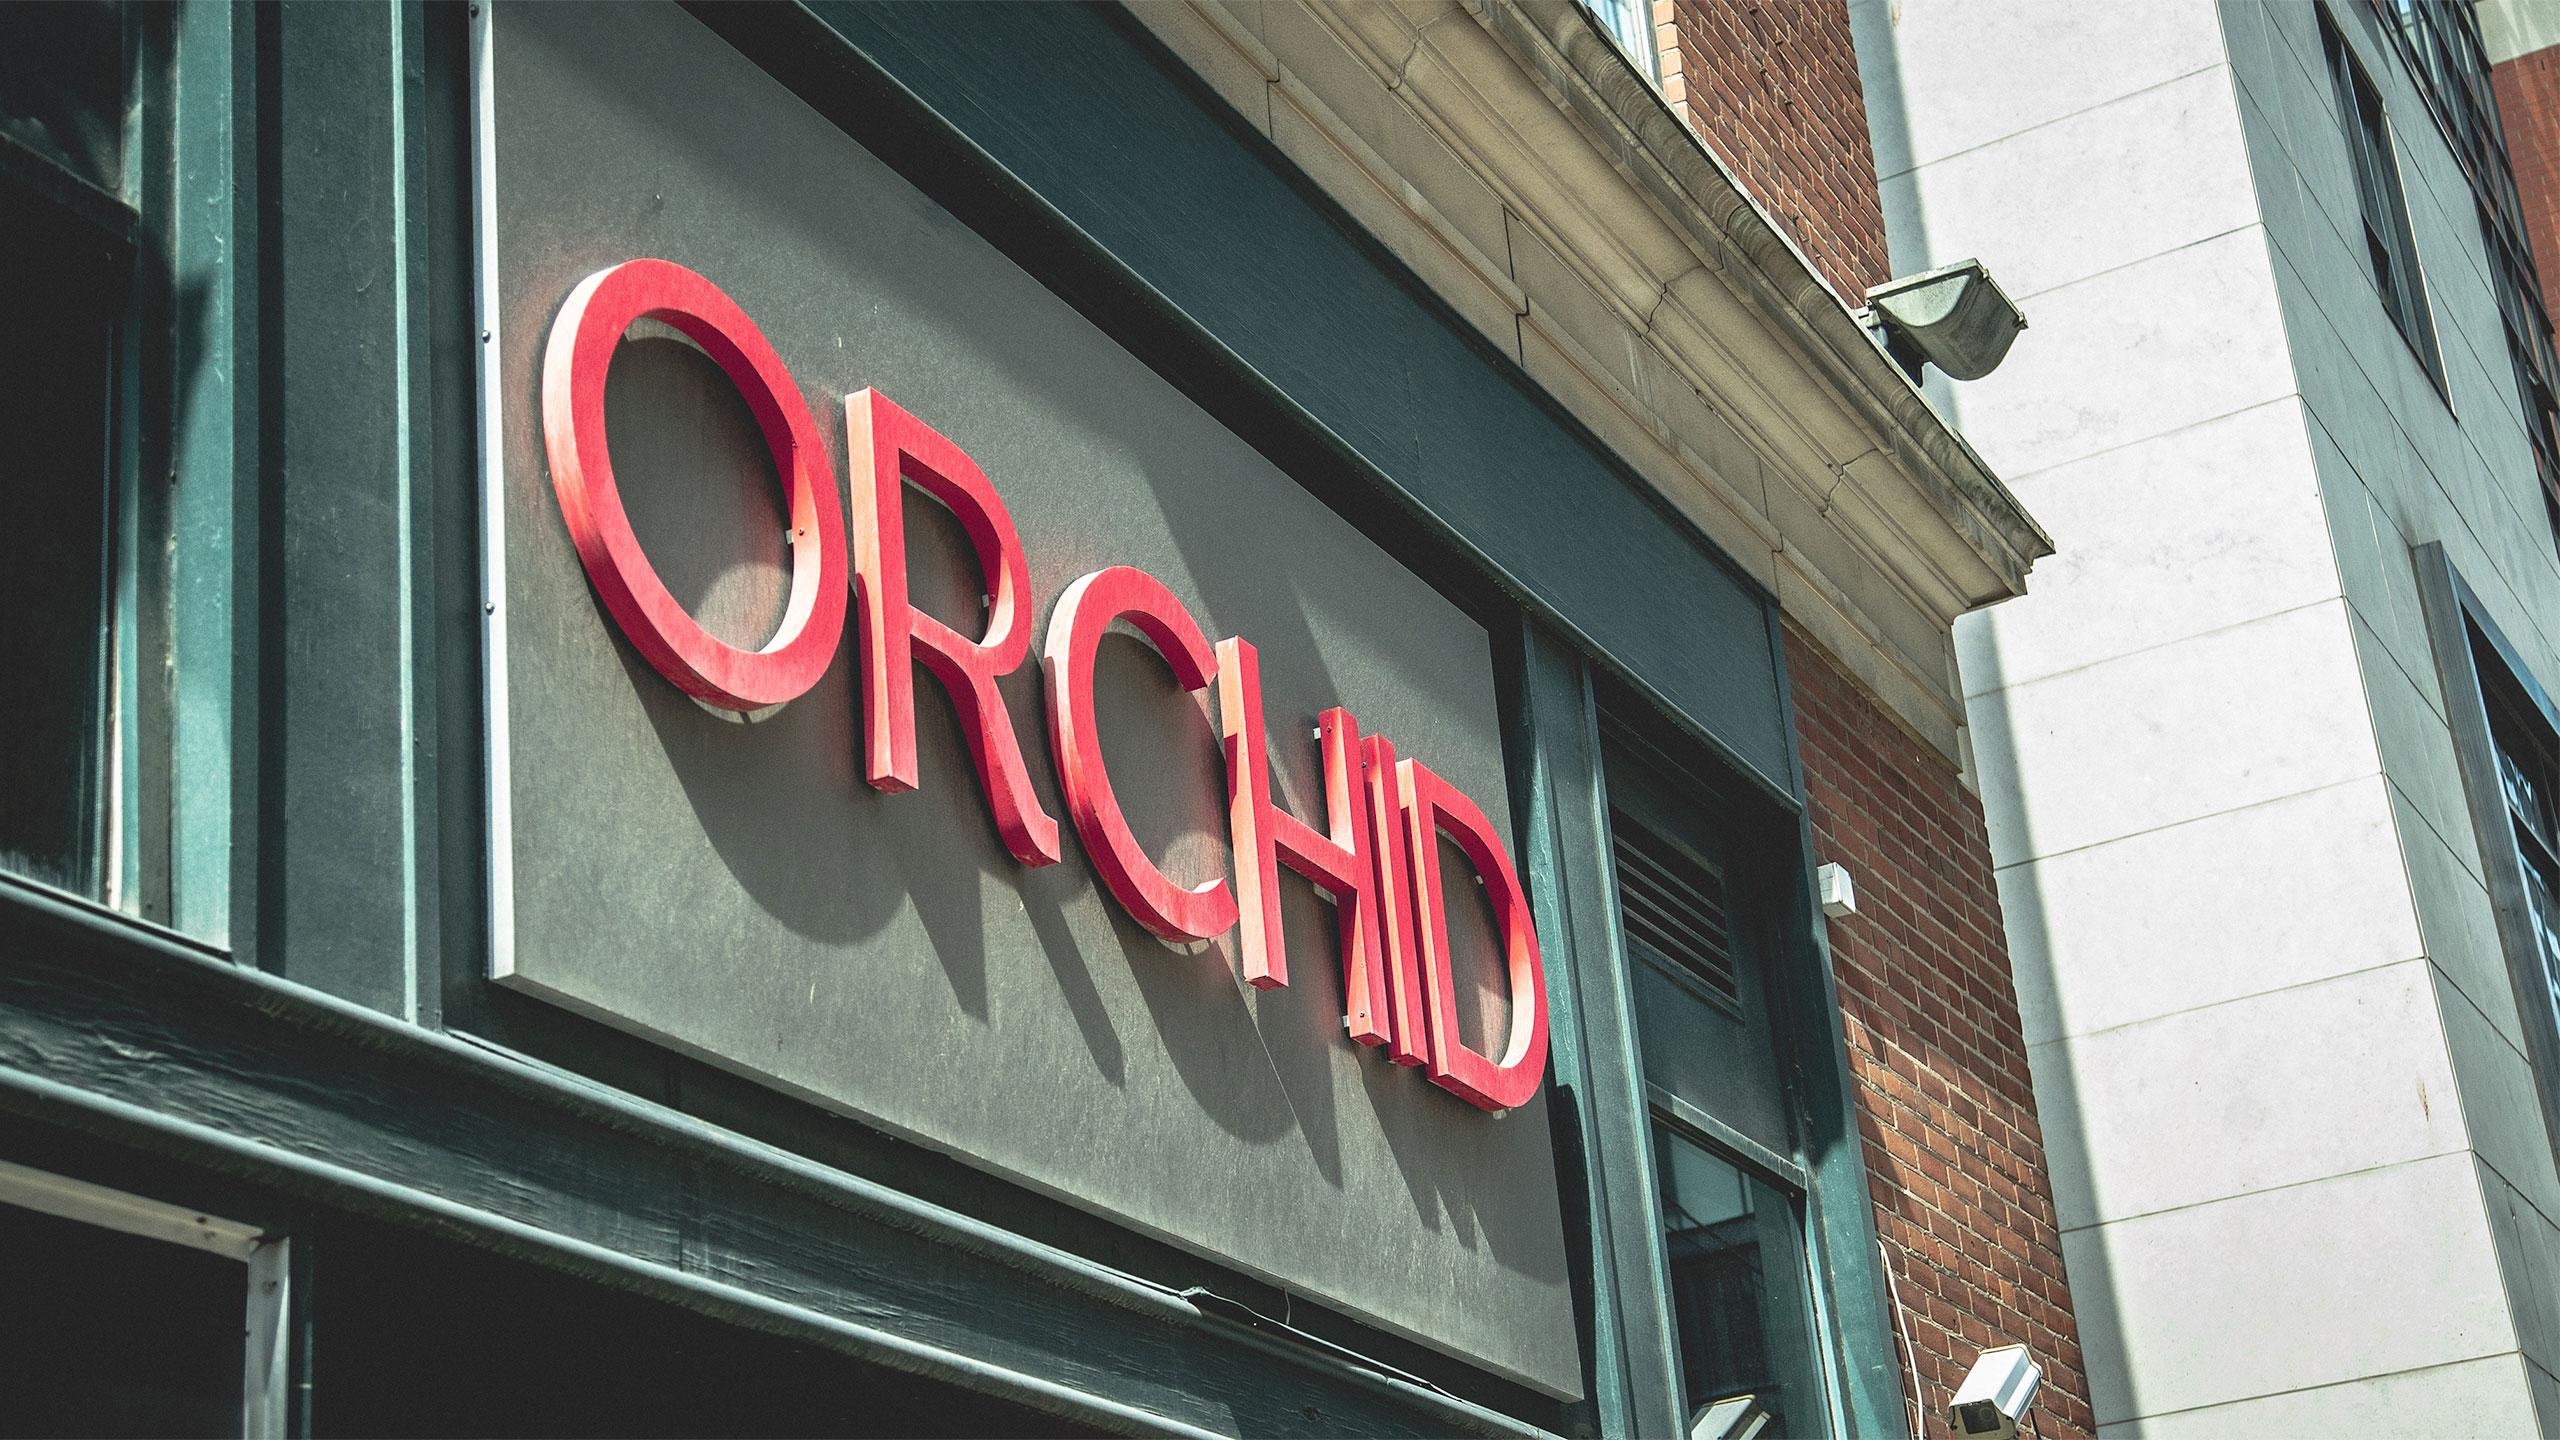 A shot of the outside the nightclub, Orchid during the daytime